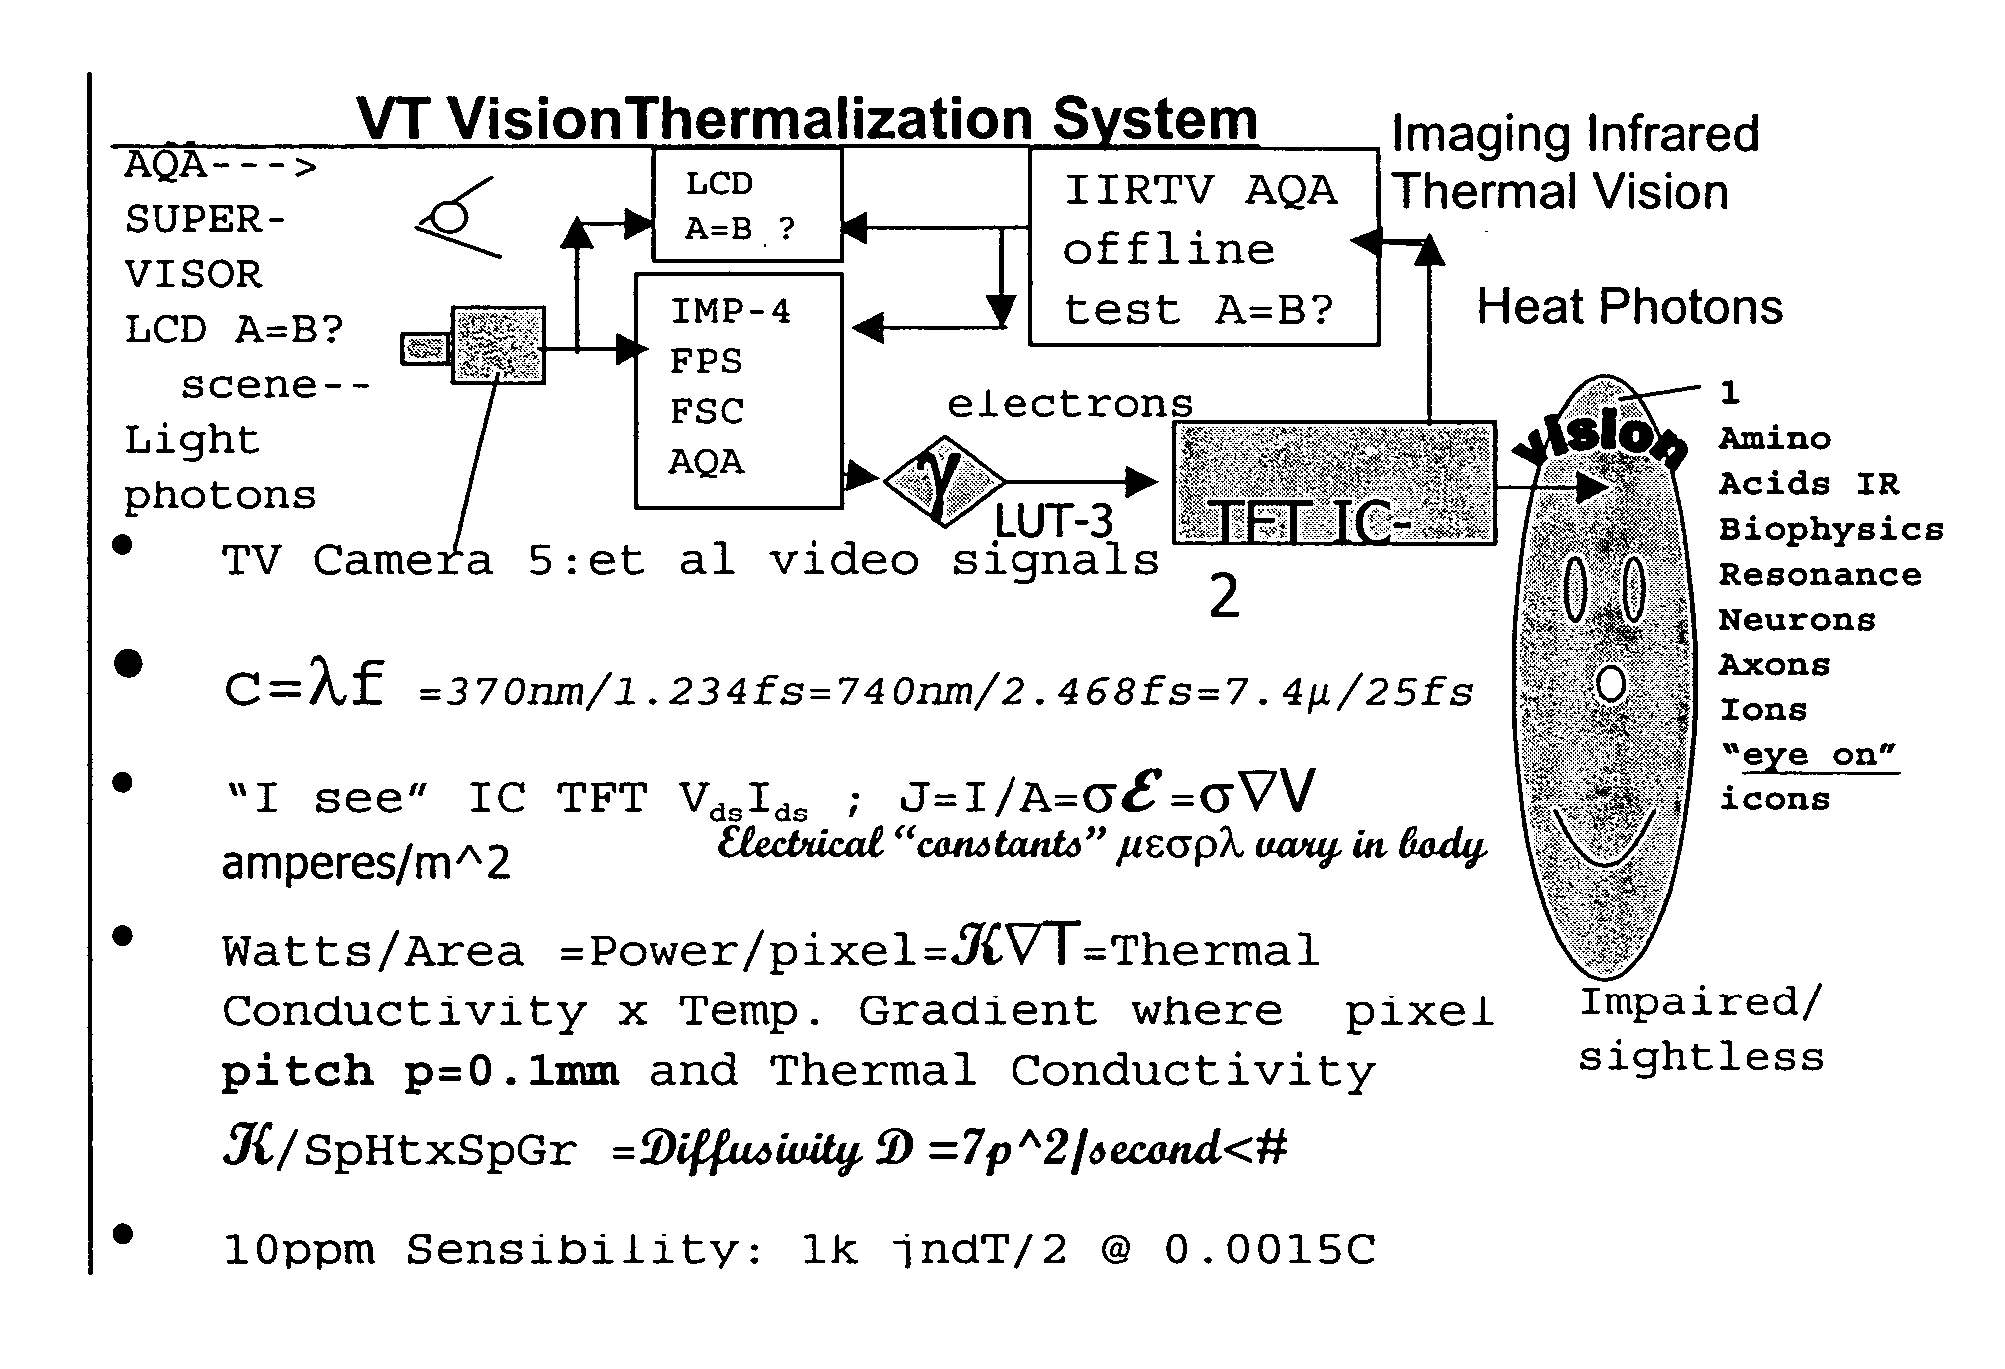 Vision thermalization for sightless & visually impaired